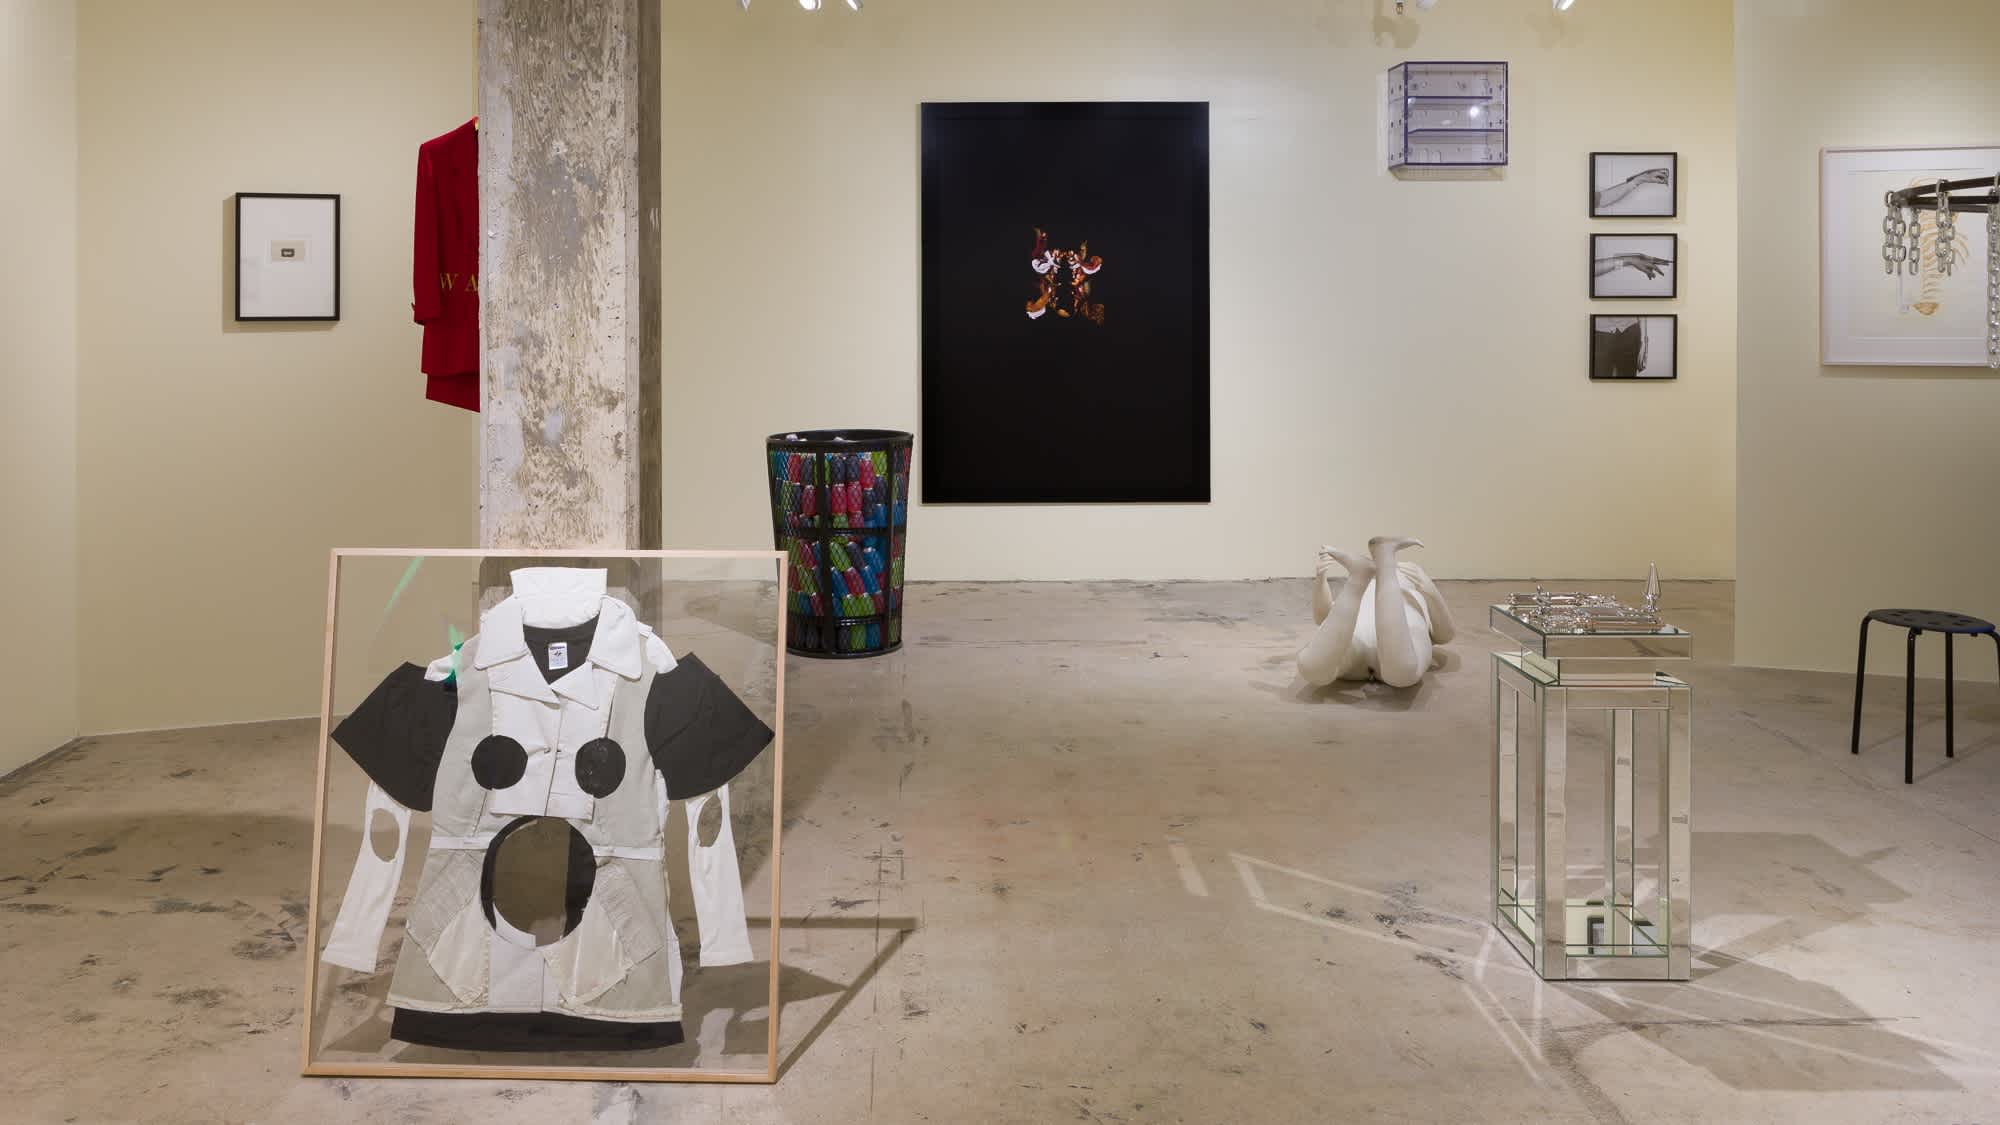 Exhibition photograph that features several sculptures on the floor and framed works on the wall.